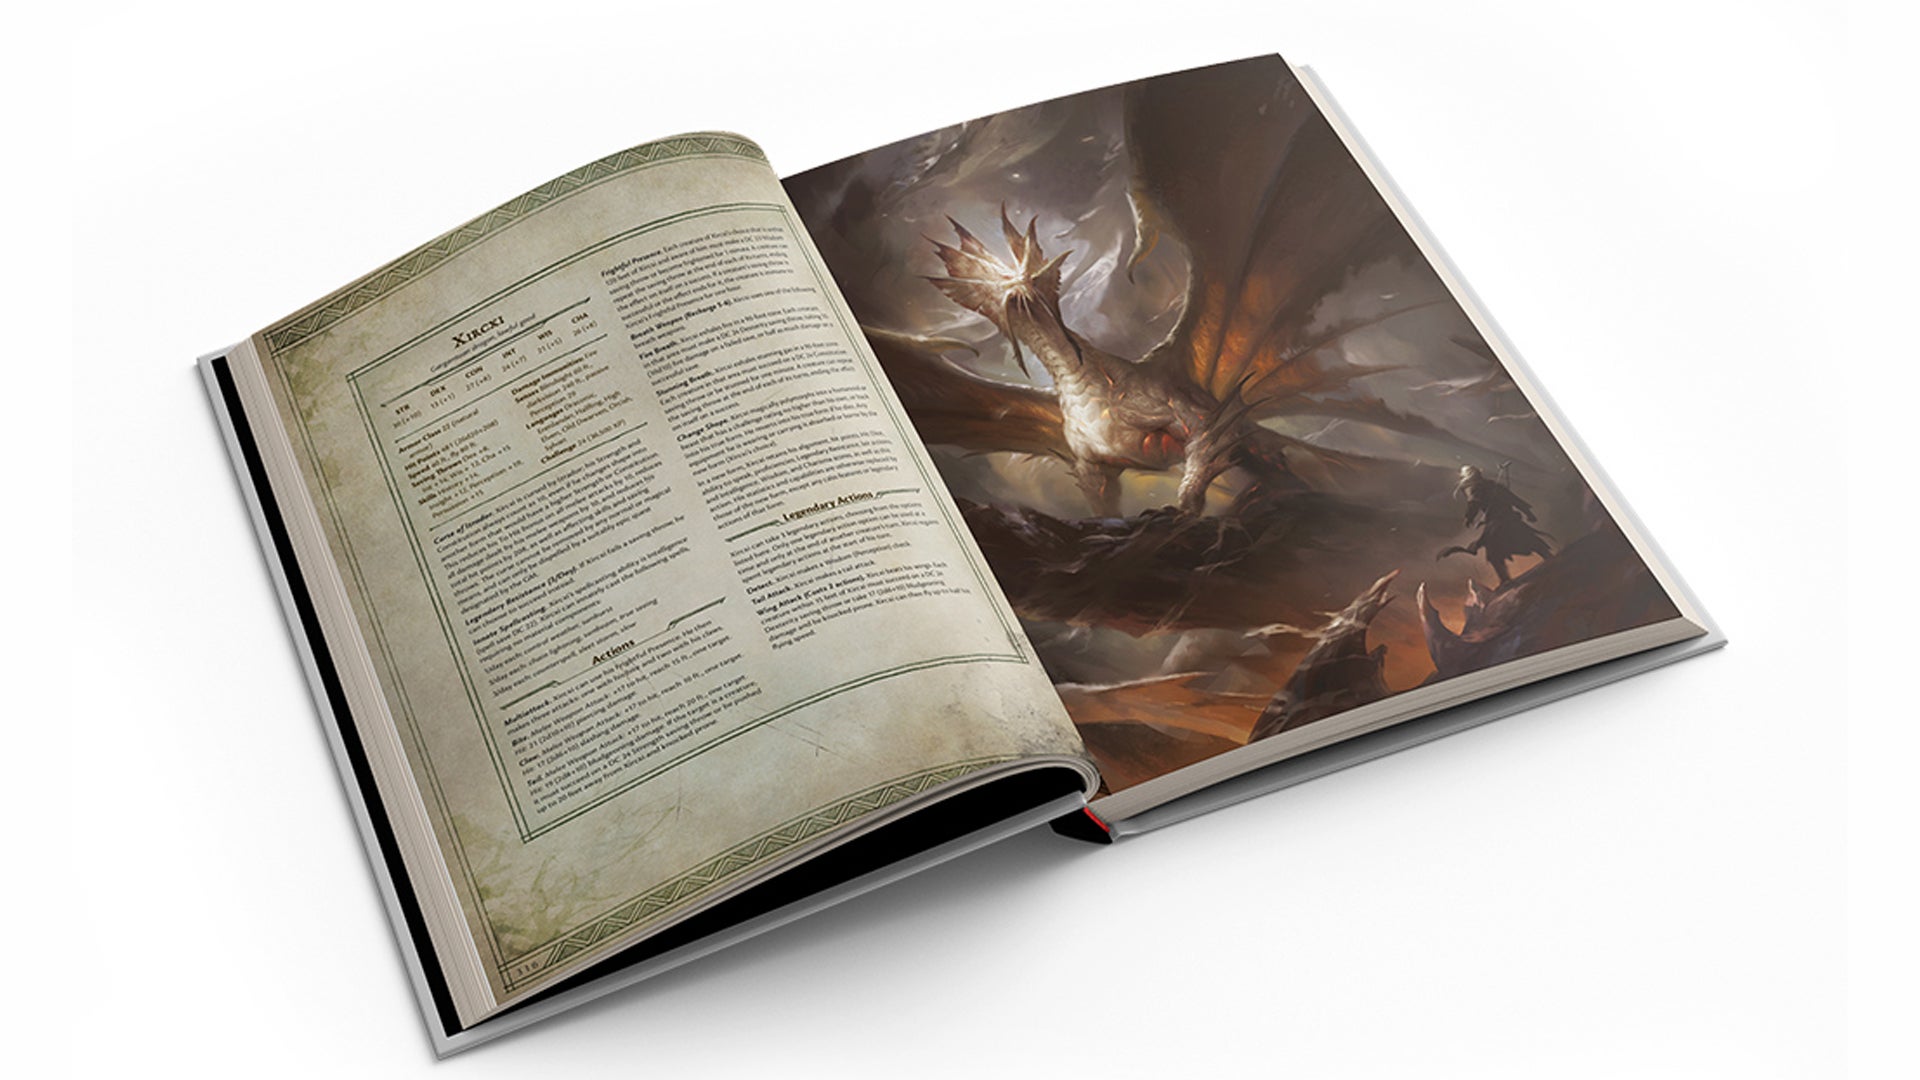 An image of the rulebook for Midnight: Legacy of Darkness